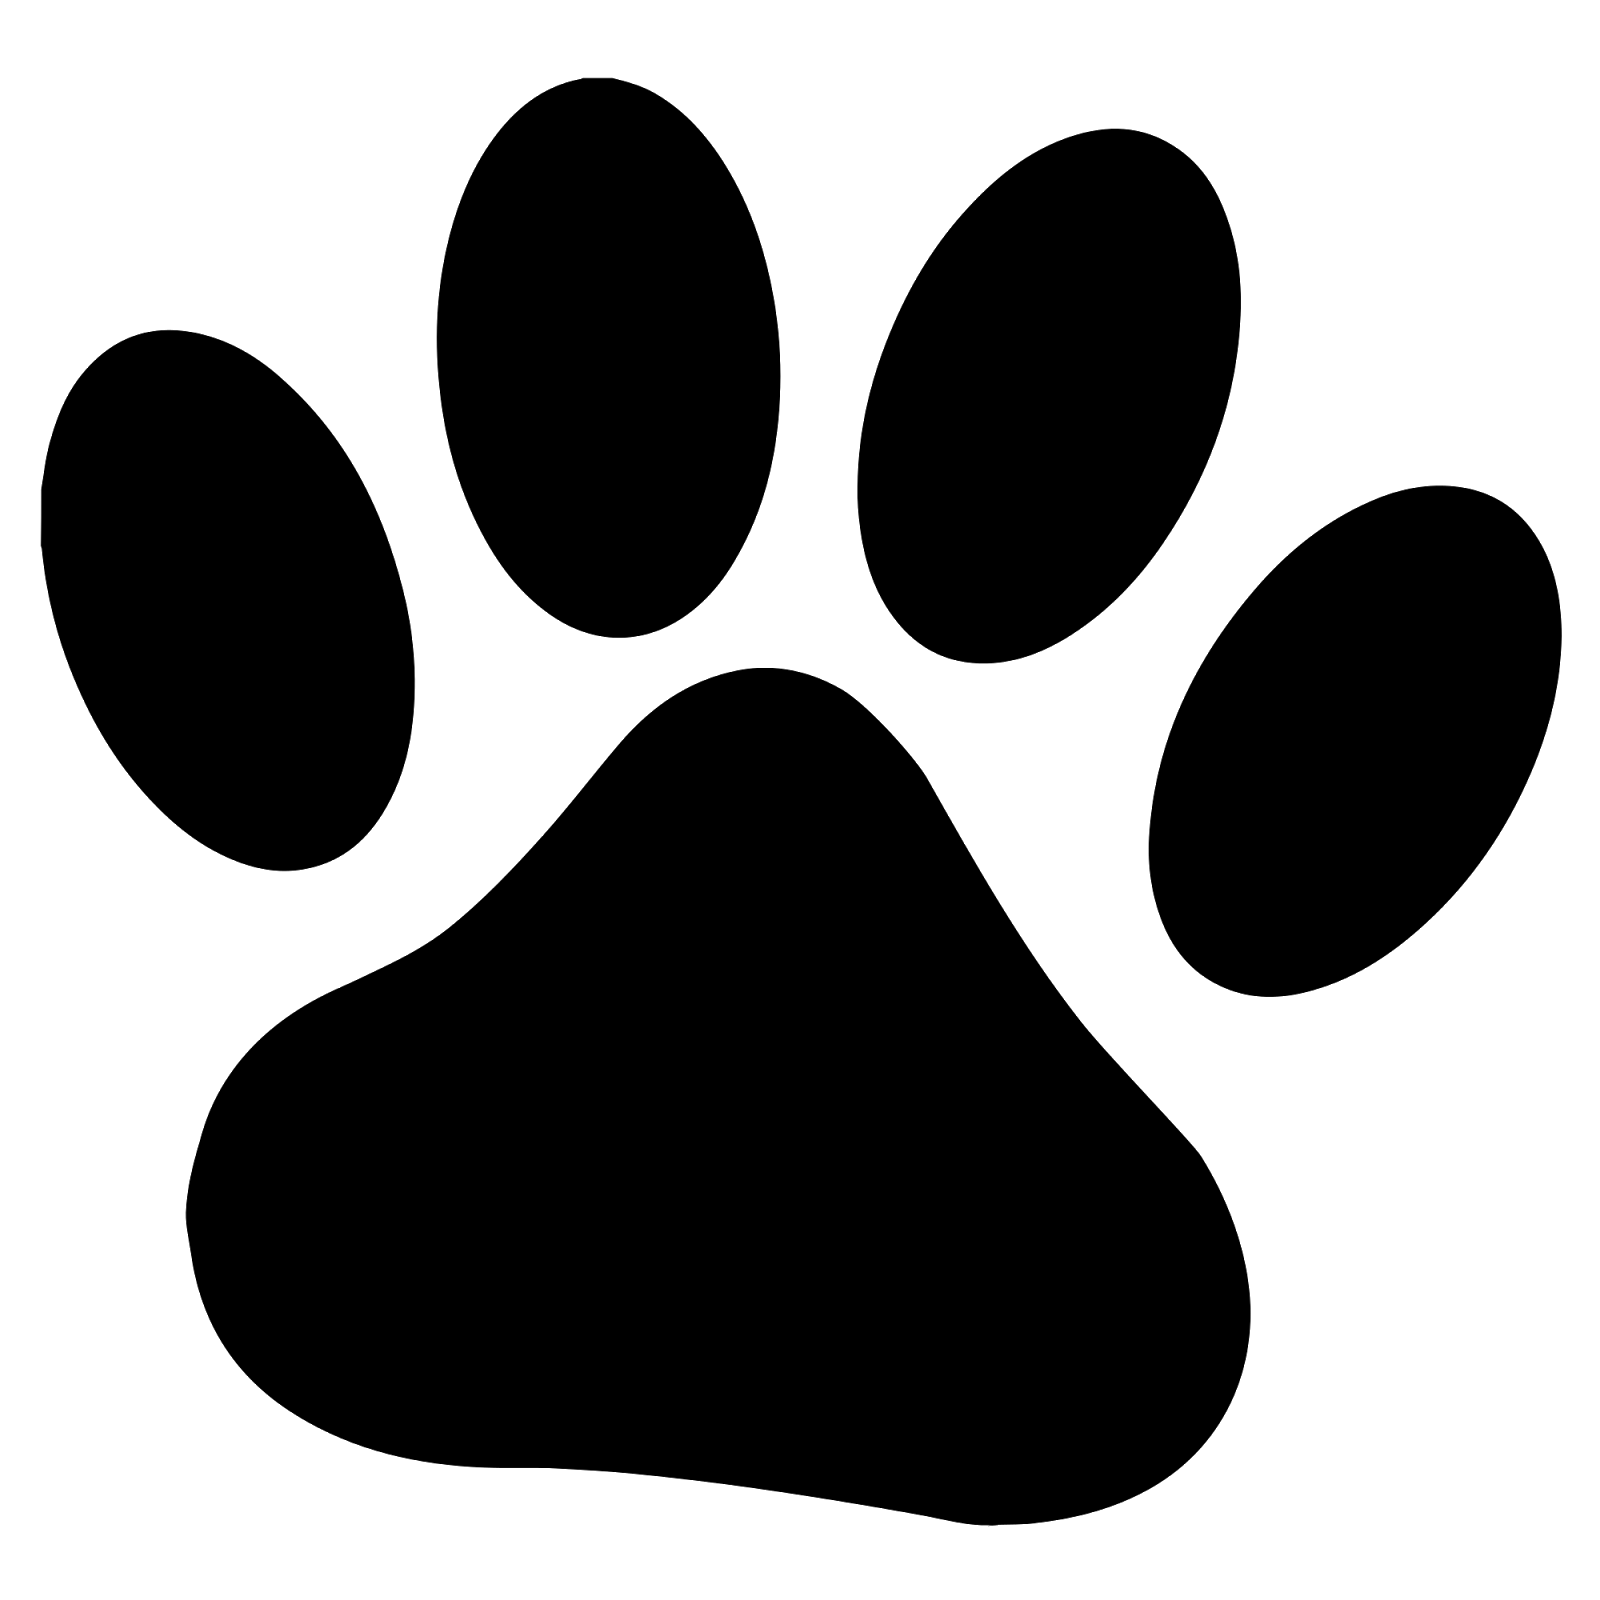 Amazing How To Draw Paw Prints in the world Check it out now 